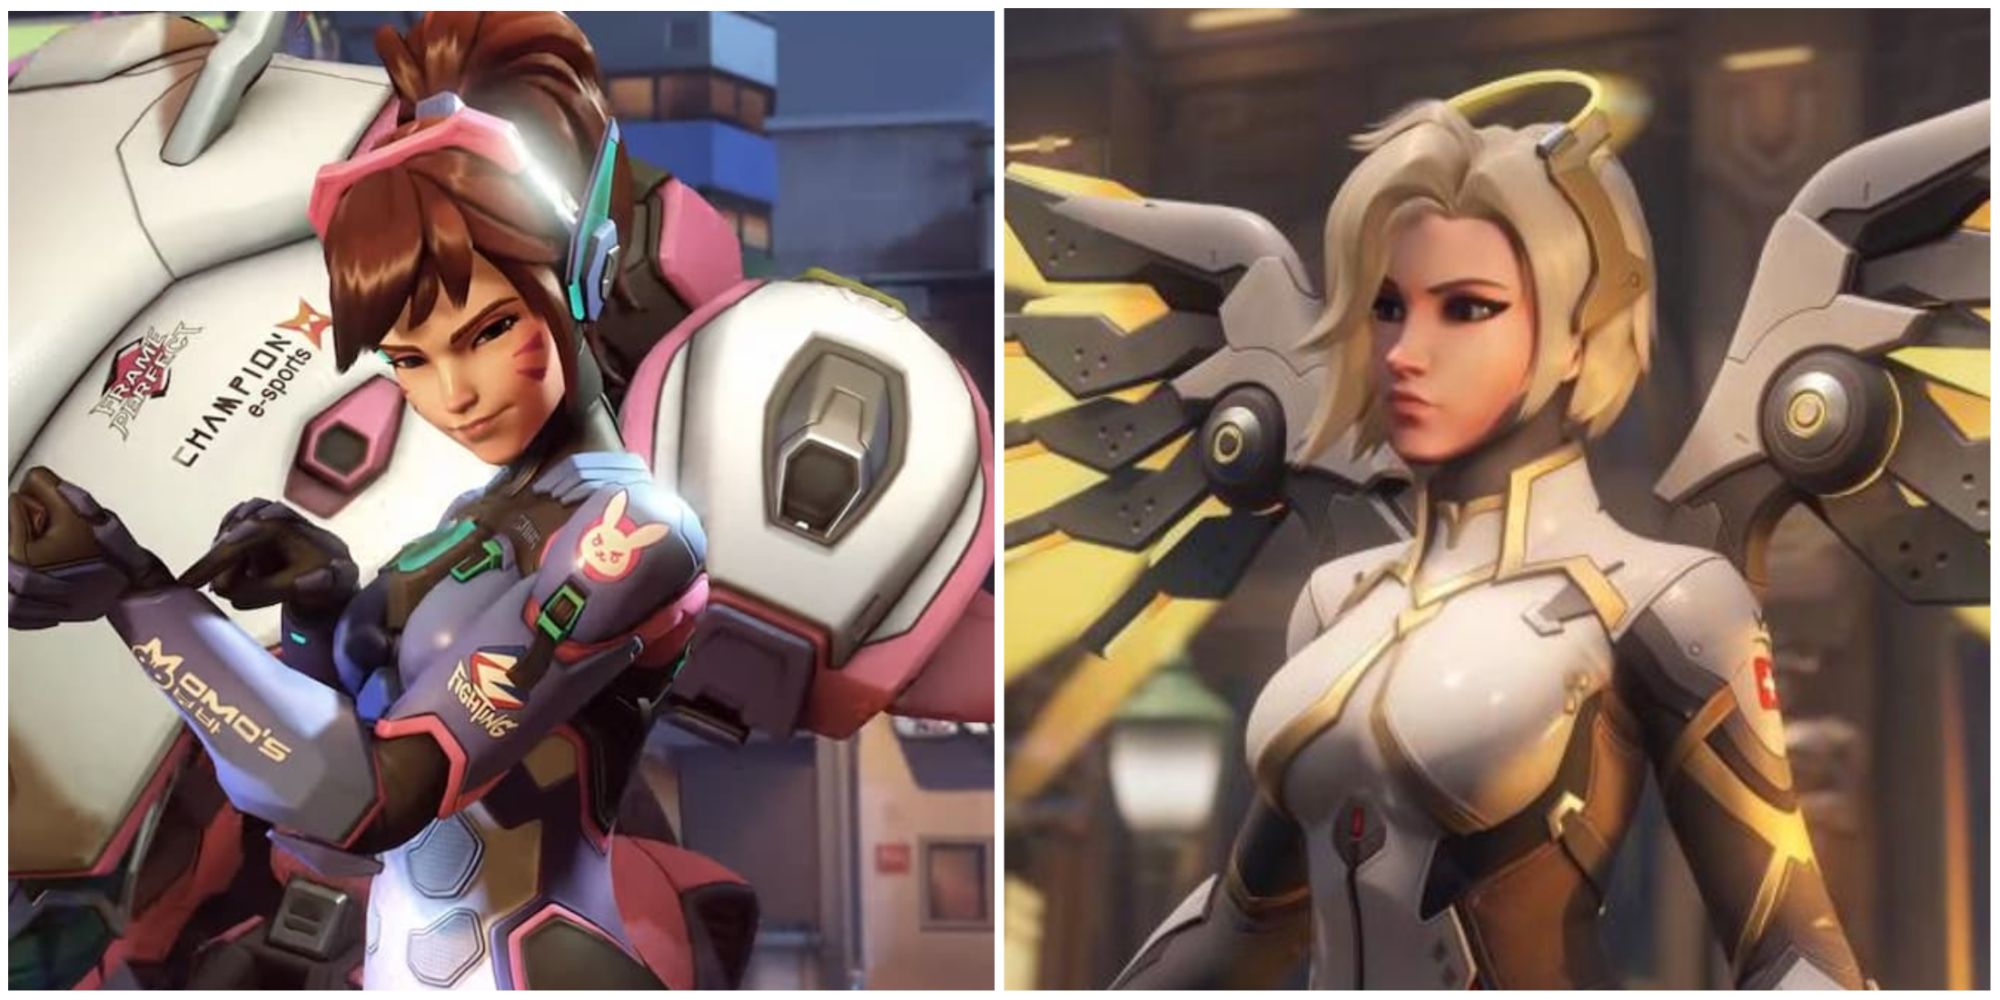 dva and mercy next to each other